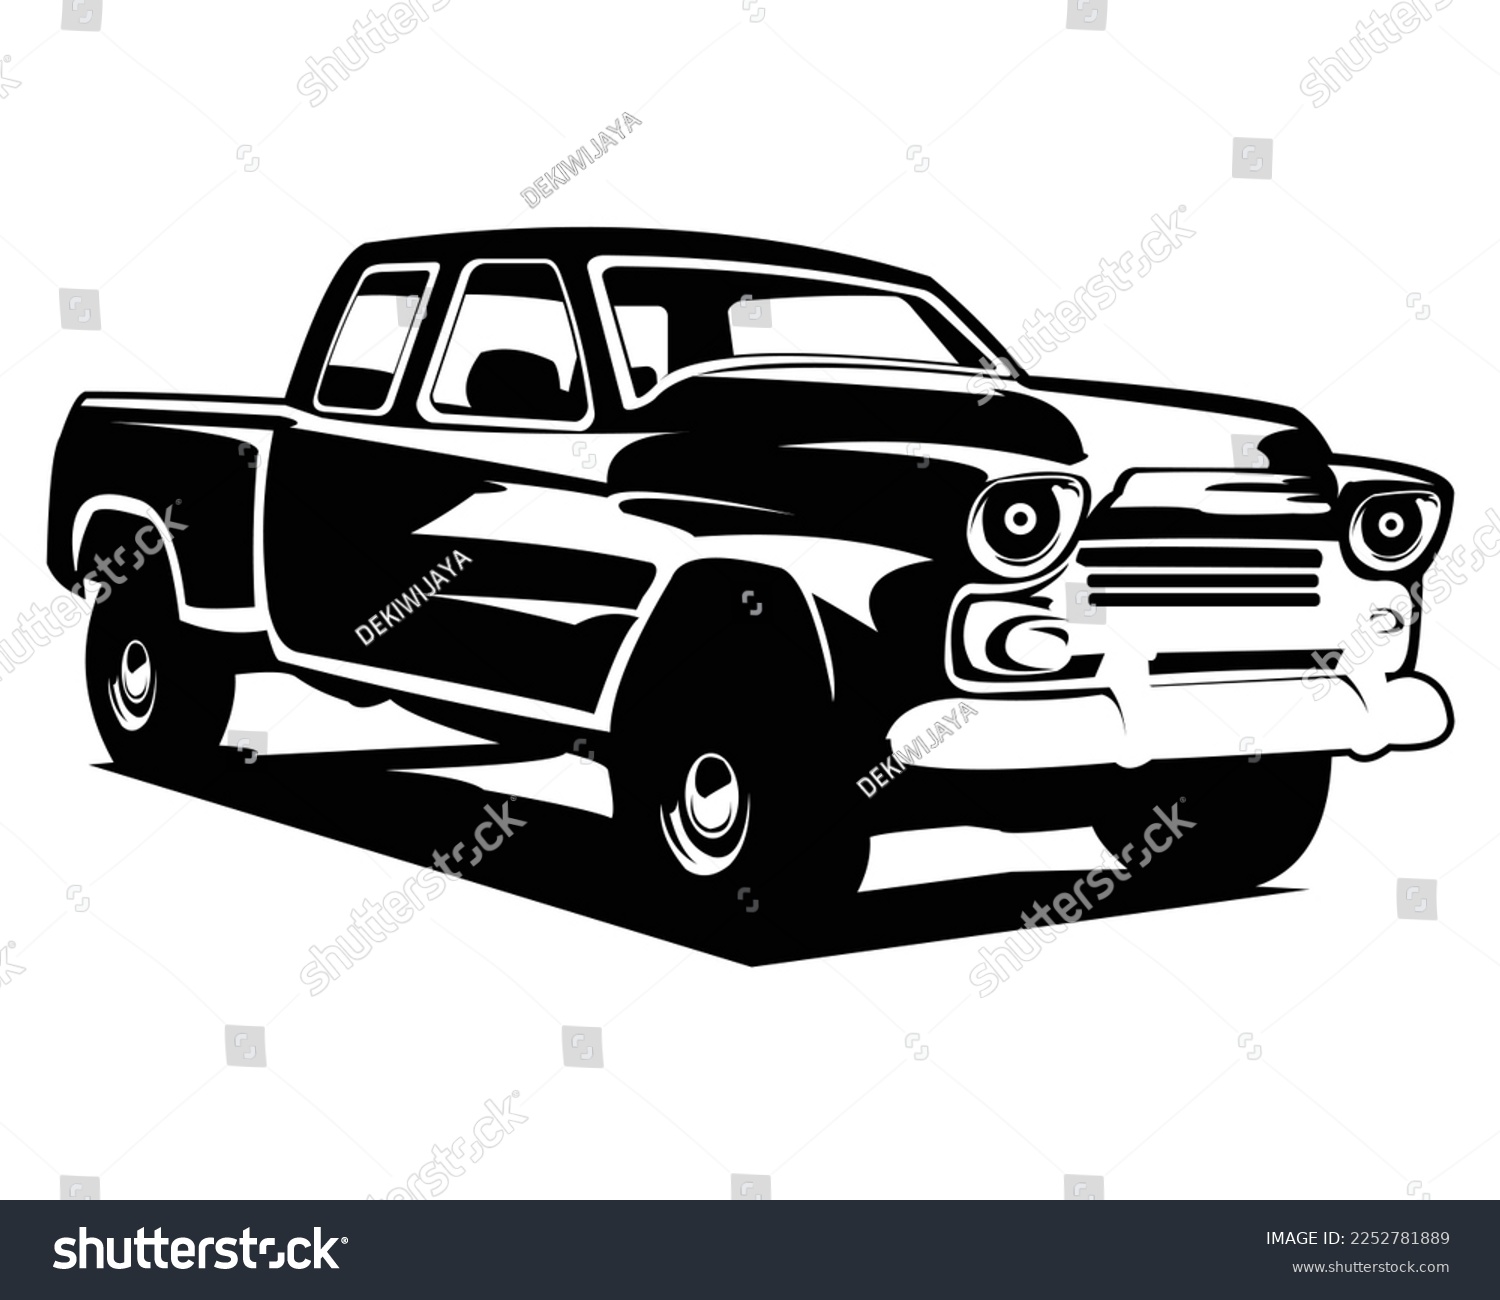 SVG of 1950s chevy truck silhouette. isolated on a white background showing from the side. premium truck design vector. Best for logo, badge, emblem, icon, sticker design. available in eps 10. svg